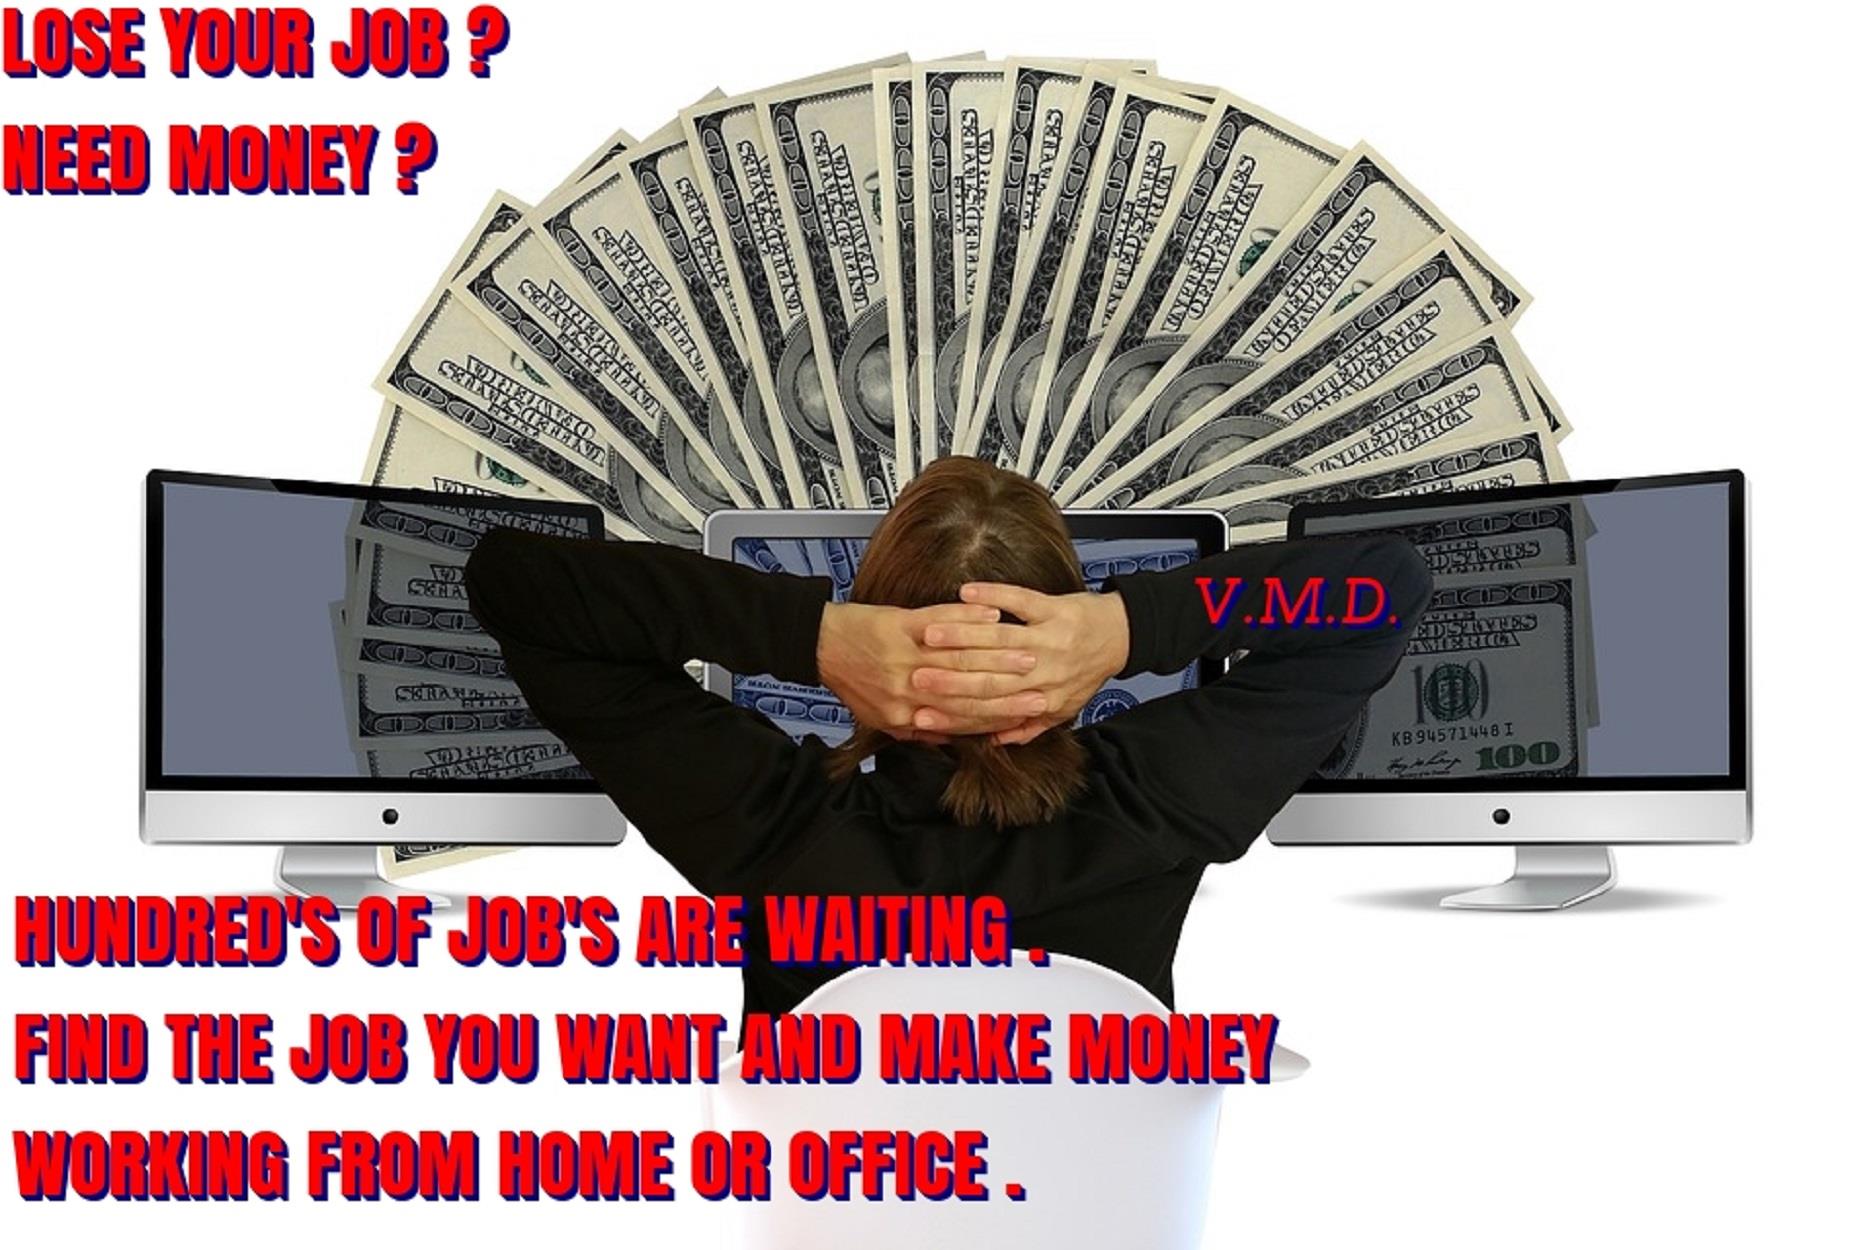 Make money working from home